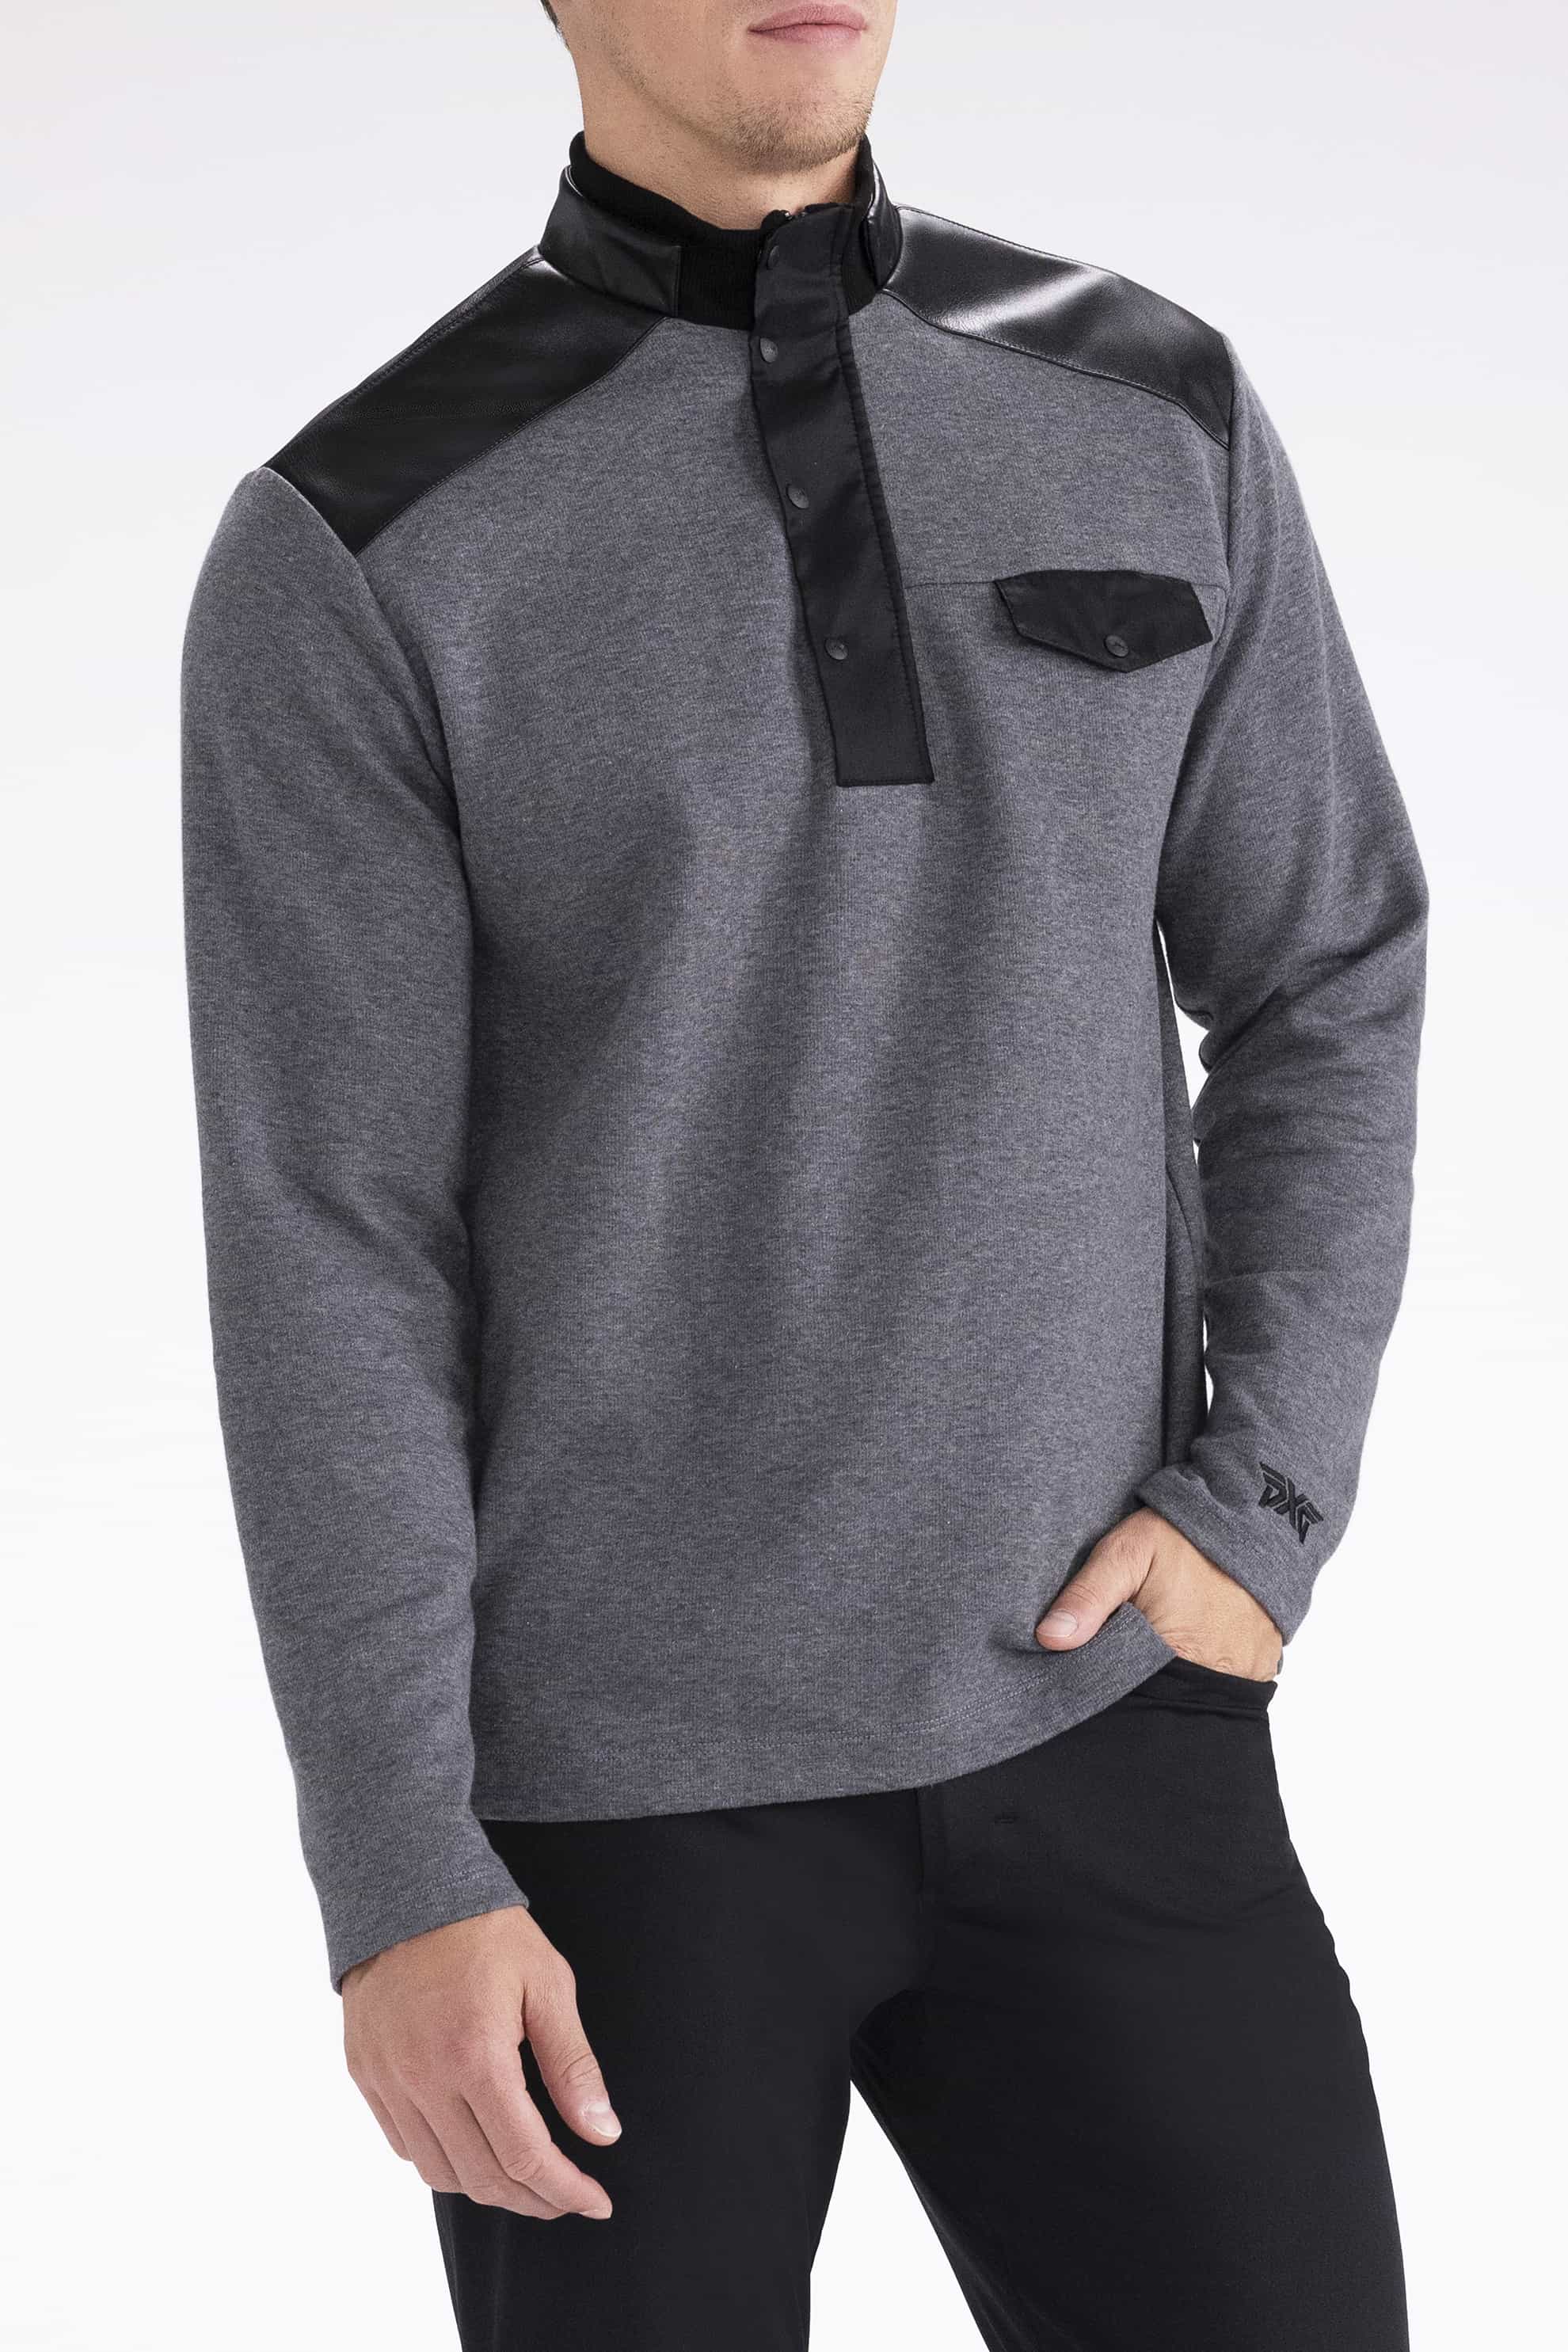 Quilted Jersey 1/4-Zip Pullover | Shop the Highest Quality Golf